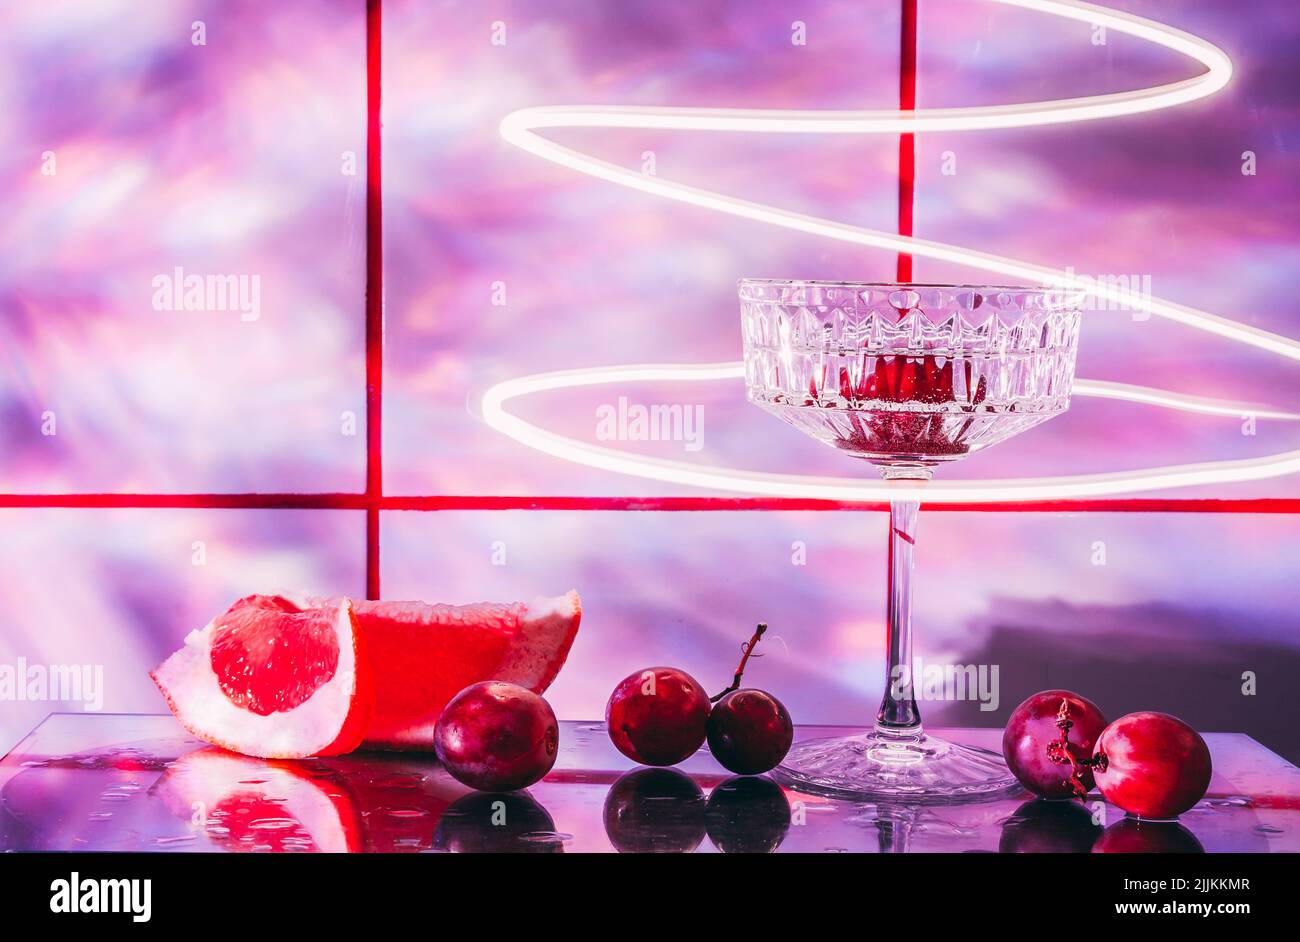 Crystal glass for cocktails on a glass surface. Fruits - grapes, grapefruit next to the glass. Abstract background. Stock Photo